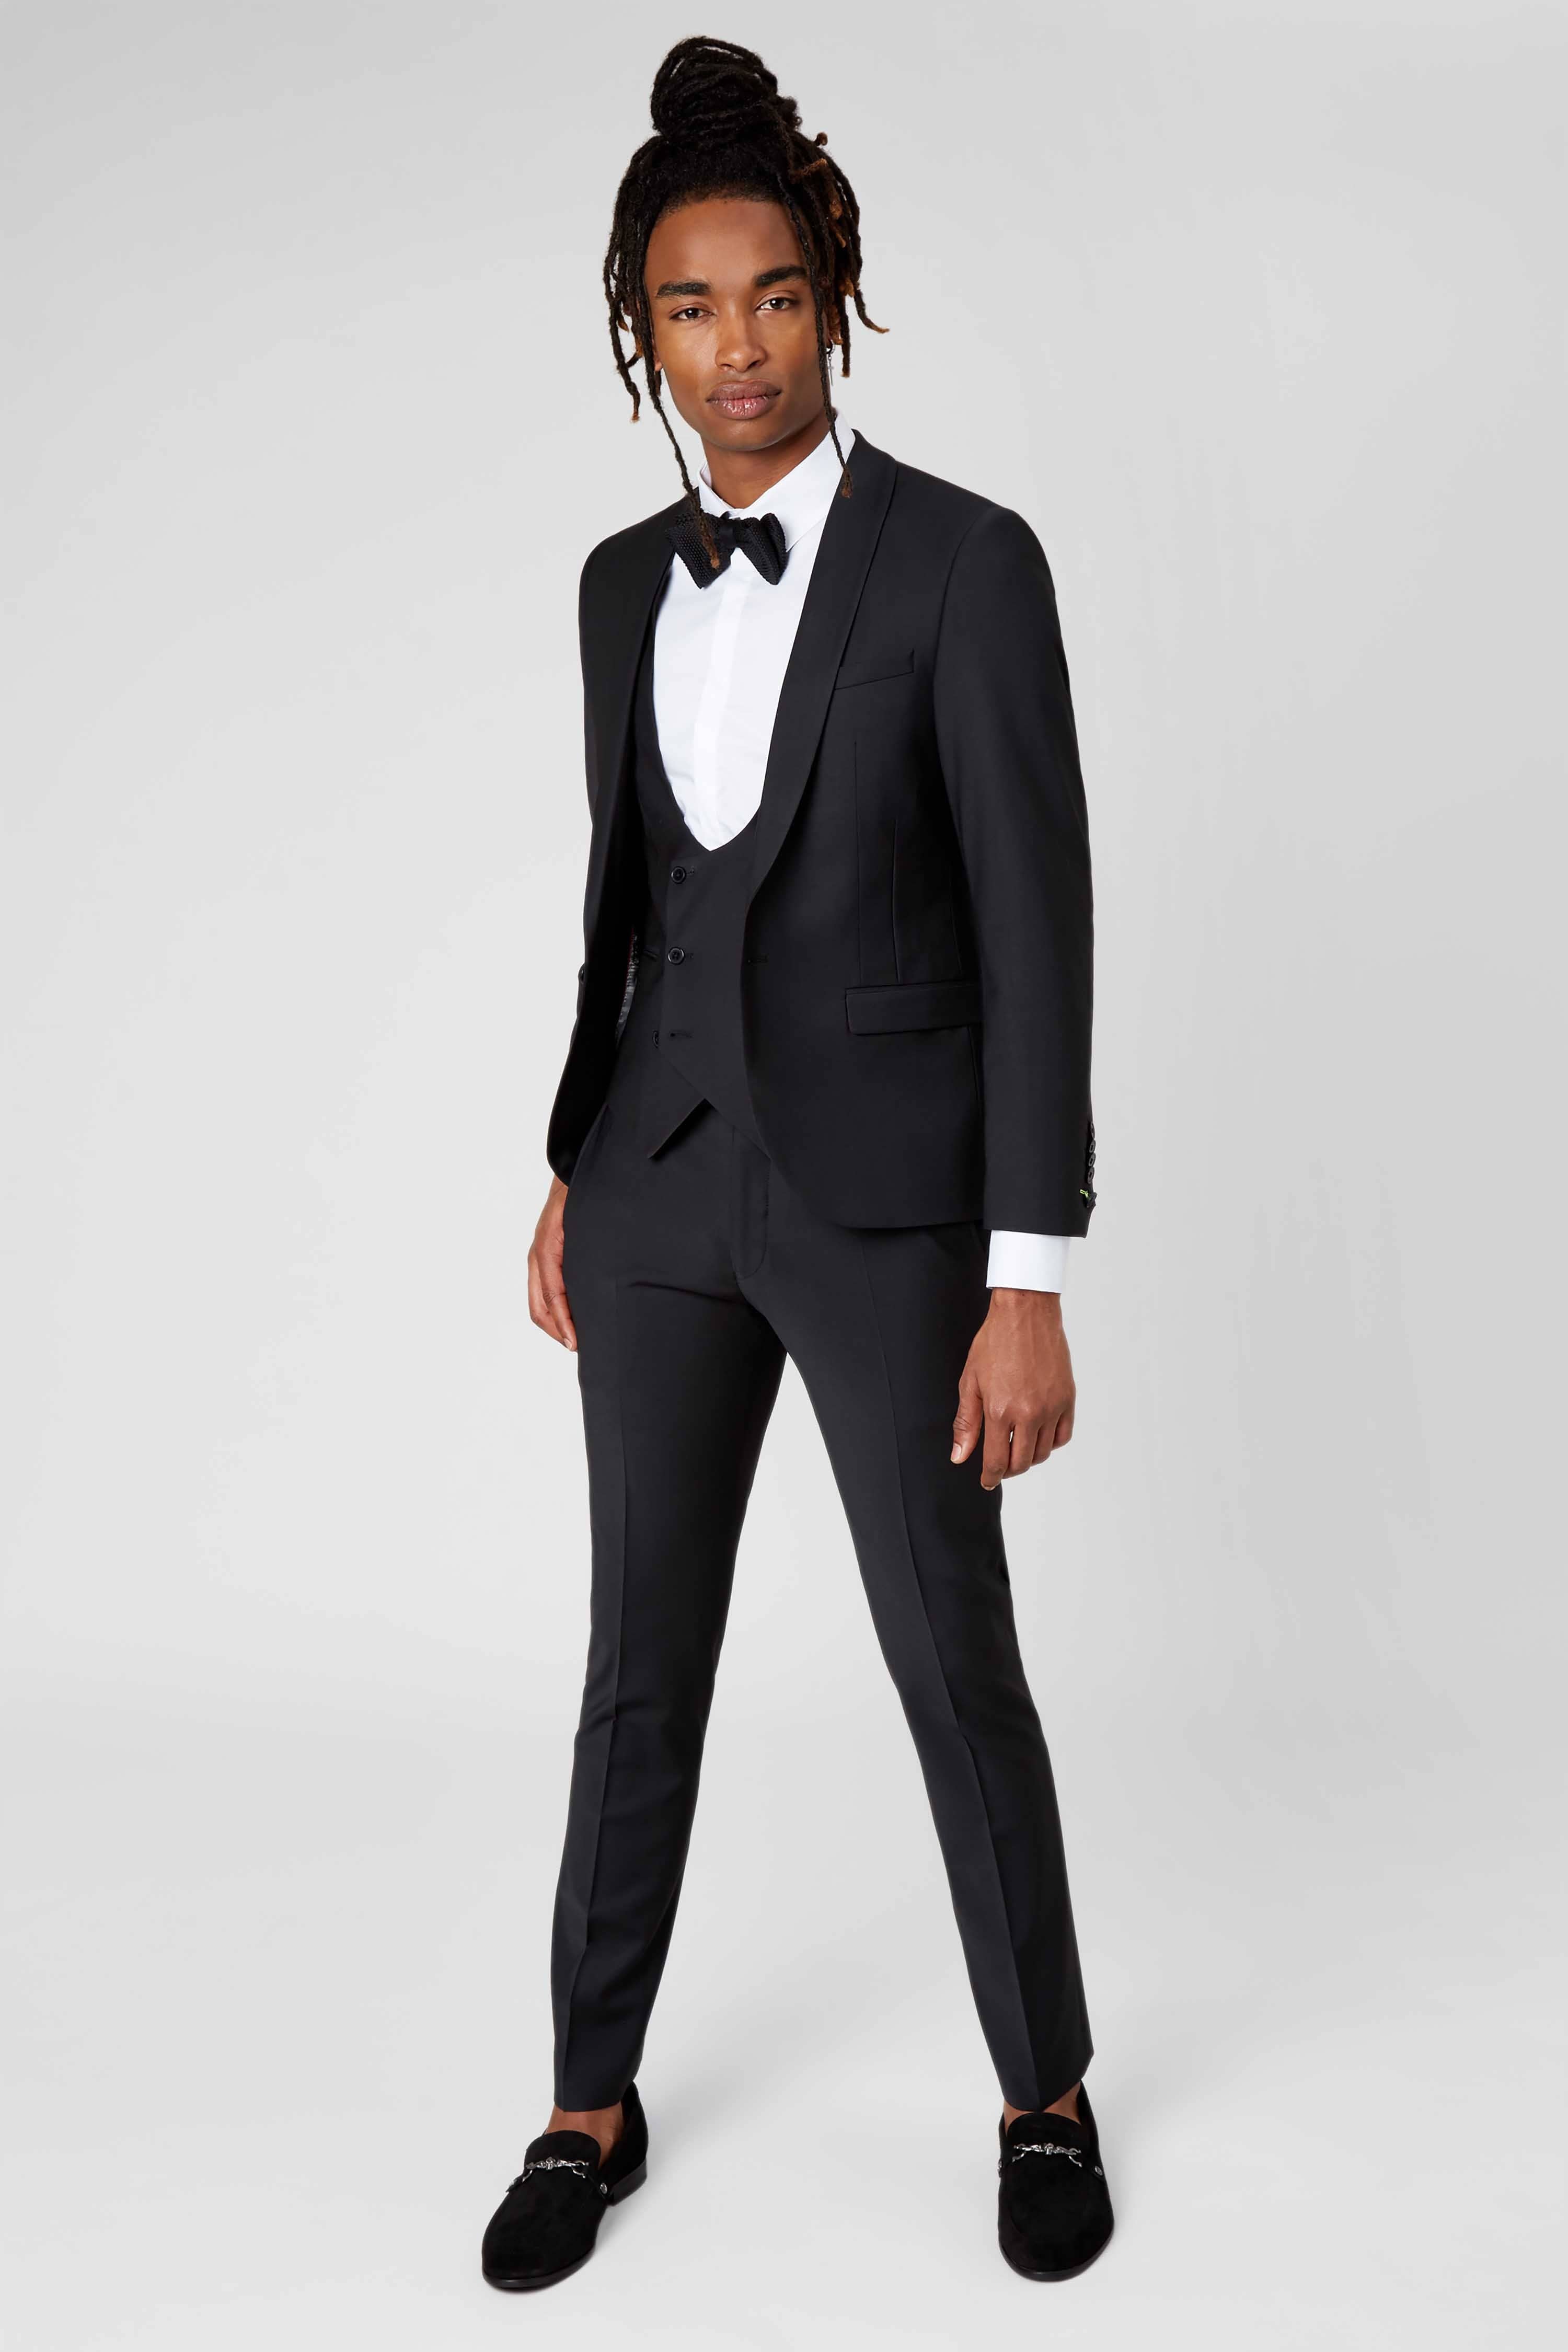 Discover 215+ mens skinny suits best